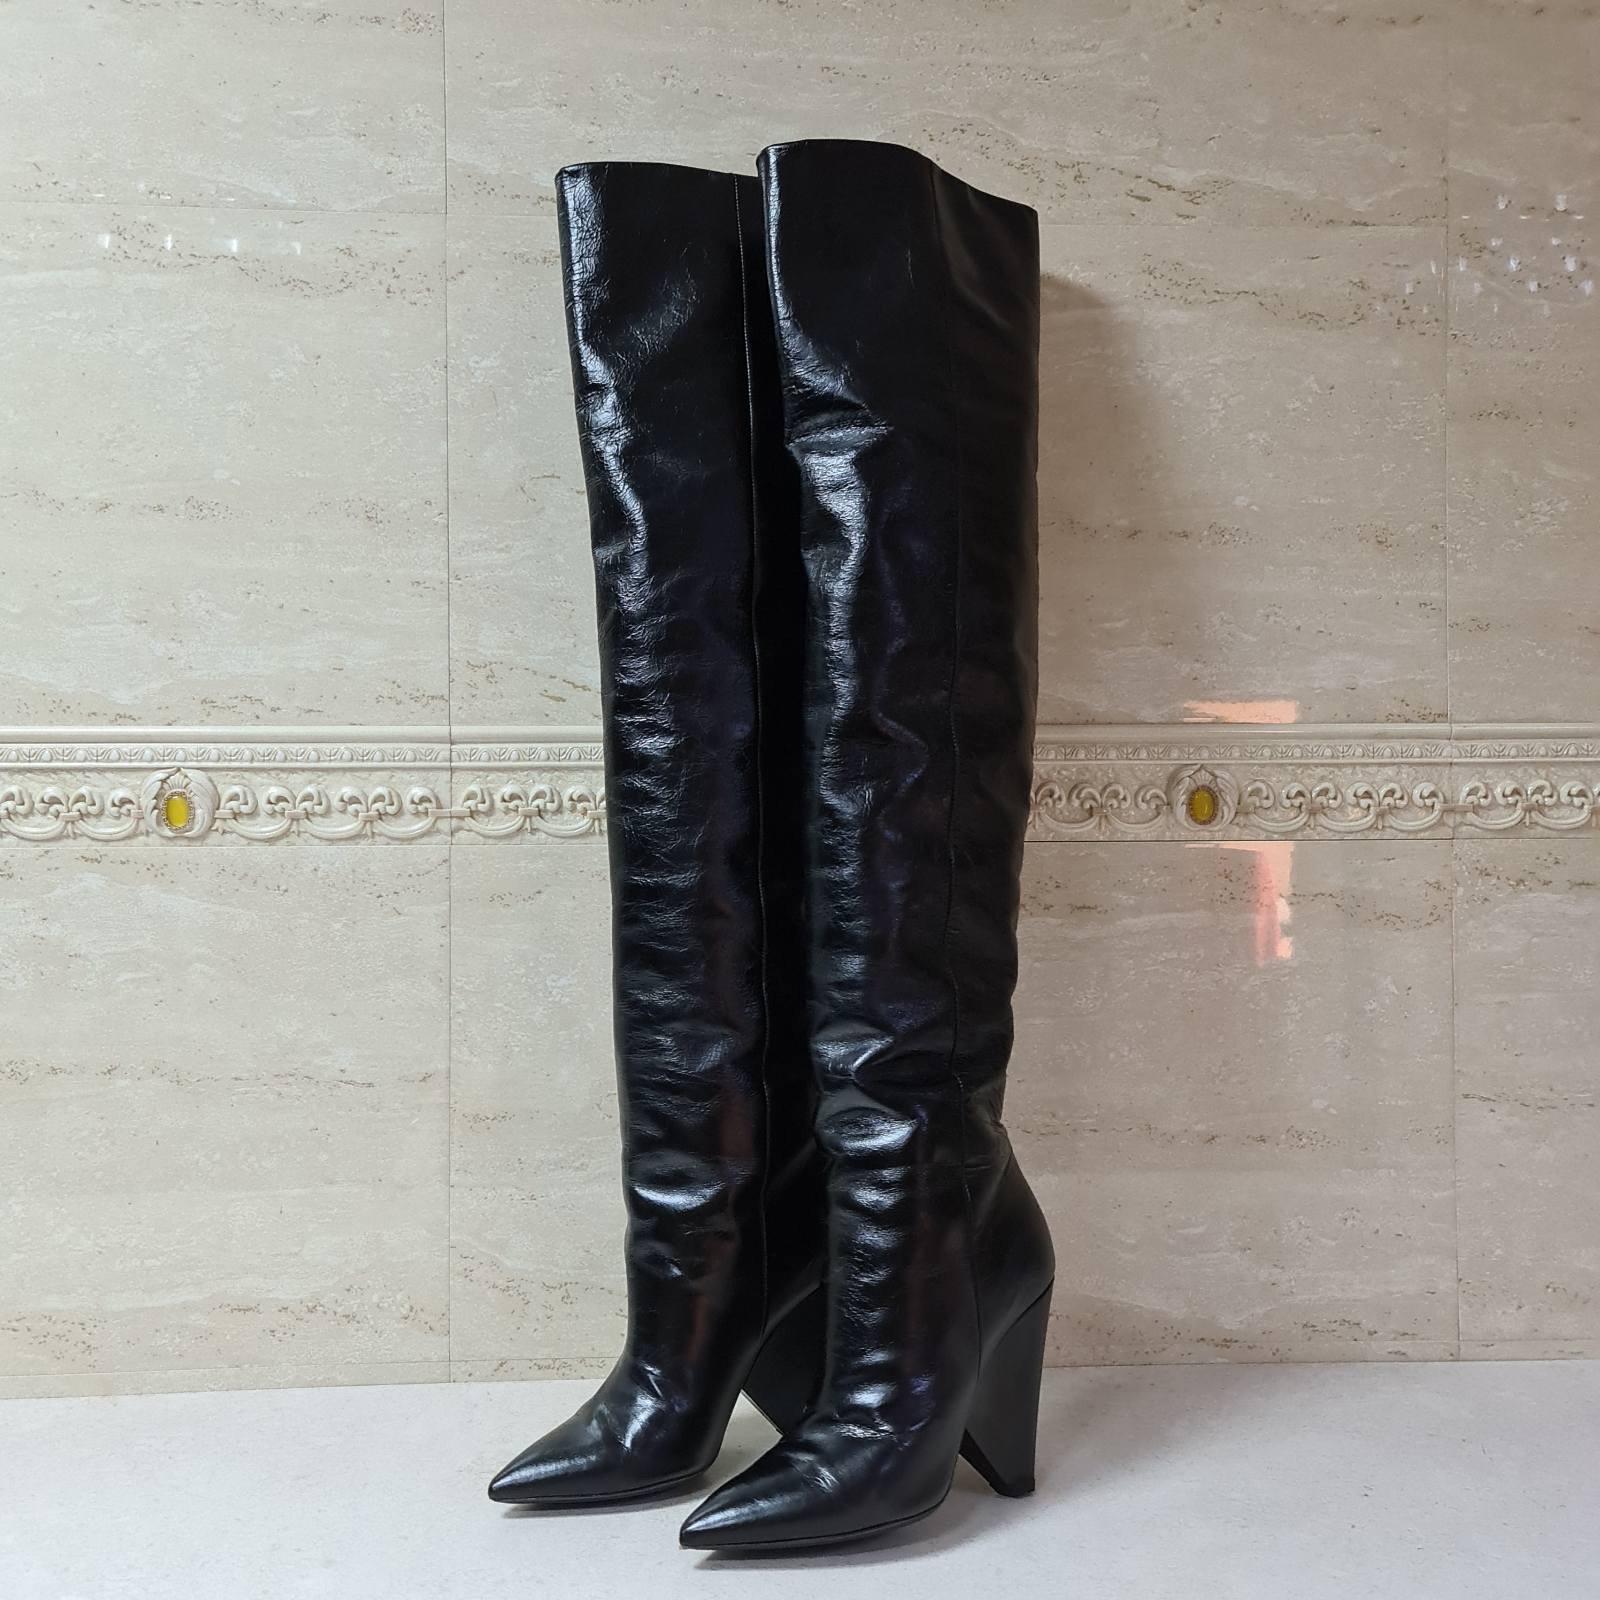 Saint Laurent Niki boots for women. 
Black Leather. 
Size 36 EU. 
Used good condition. 
Saint Laurent, created in the 1960s by the infamous designer Yves Saint Laurent, is a pillar of elegance in the world of luxury and fashion. 

No box.
